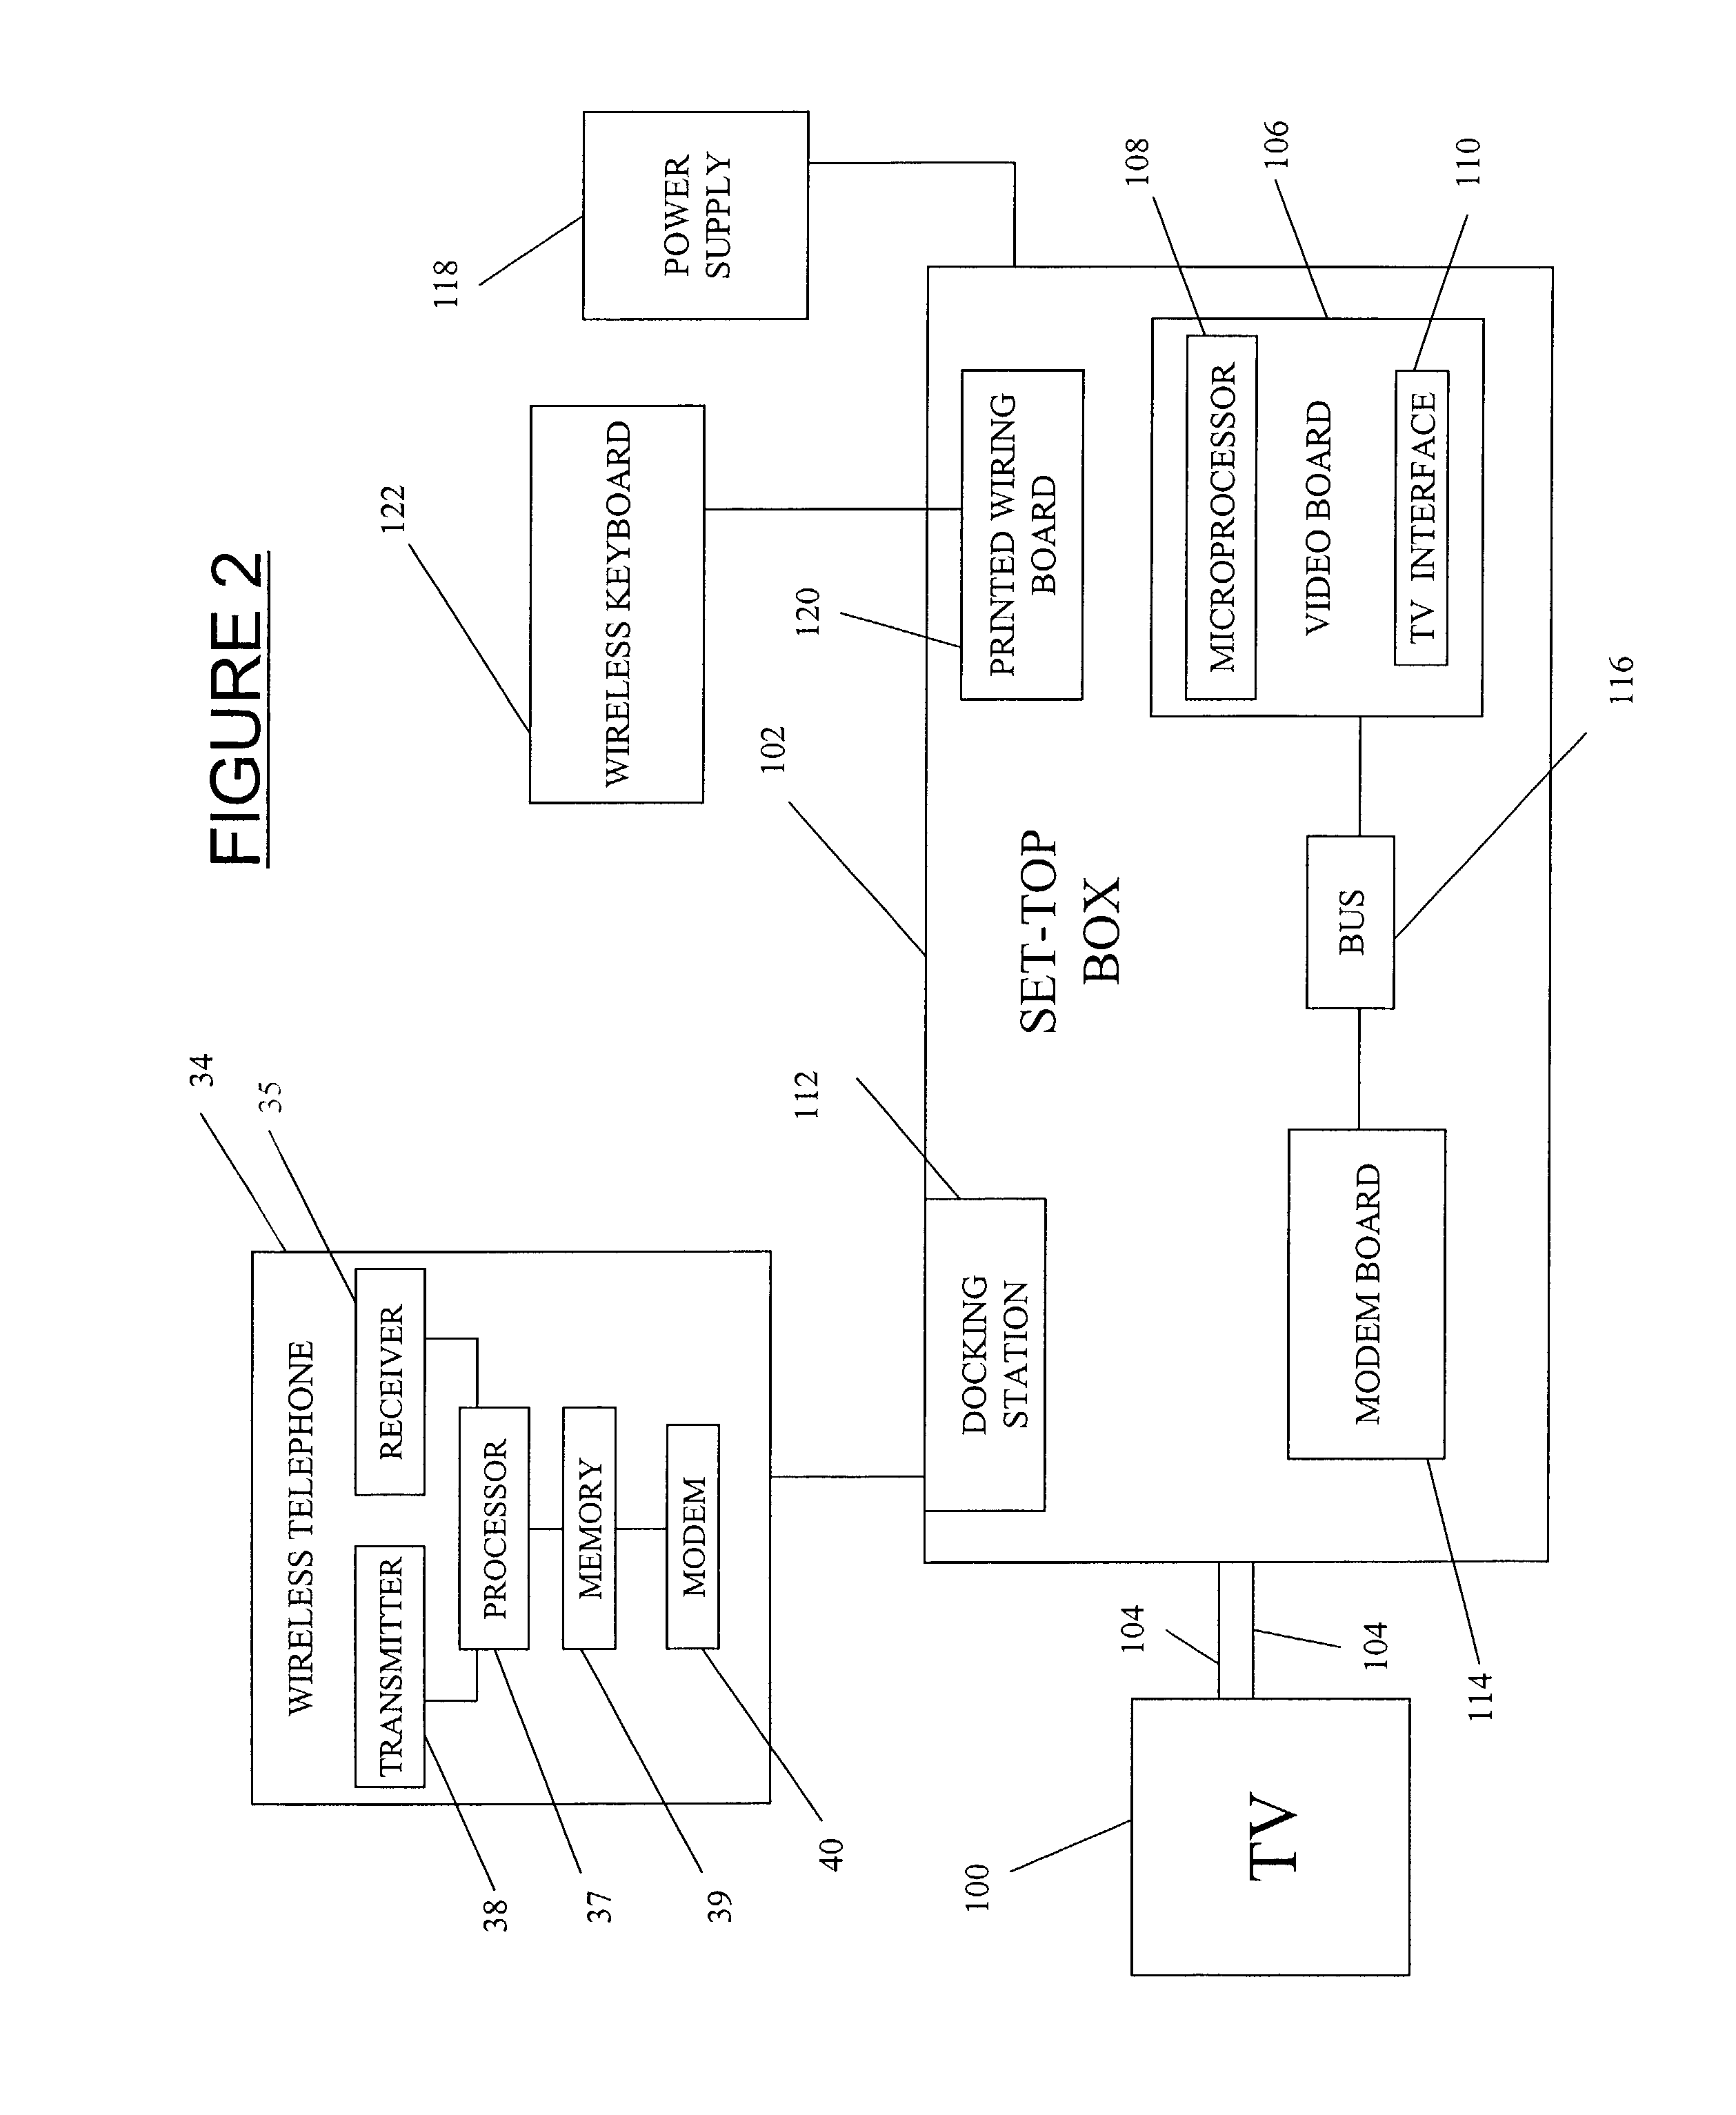 Method and systems using a set-top box and communicating between a remote data network and a wireless communication network